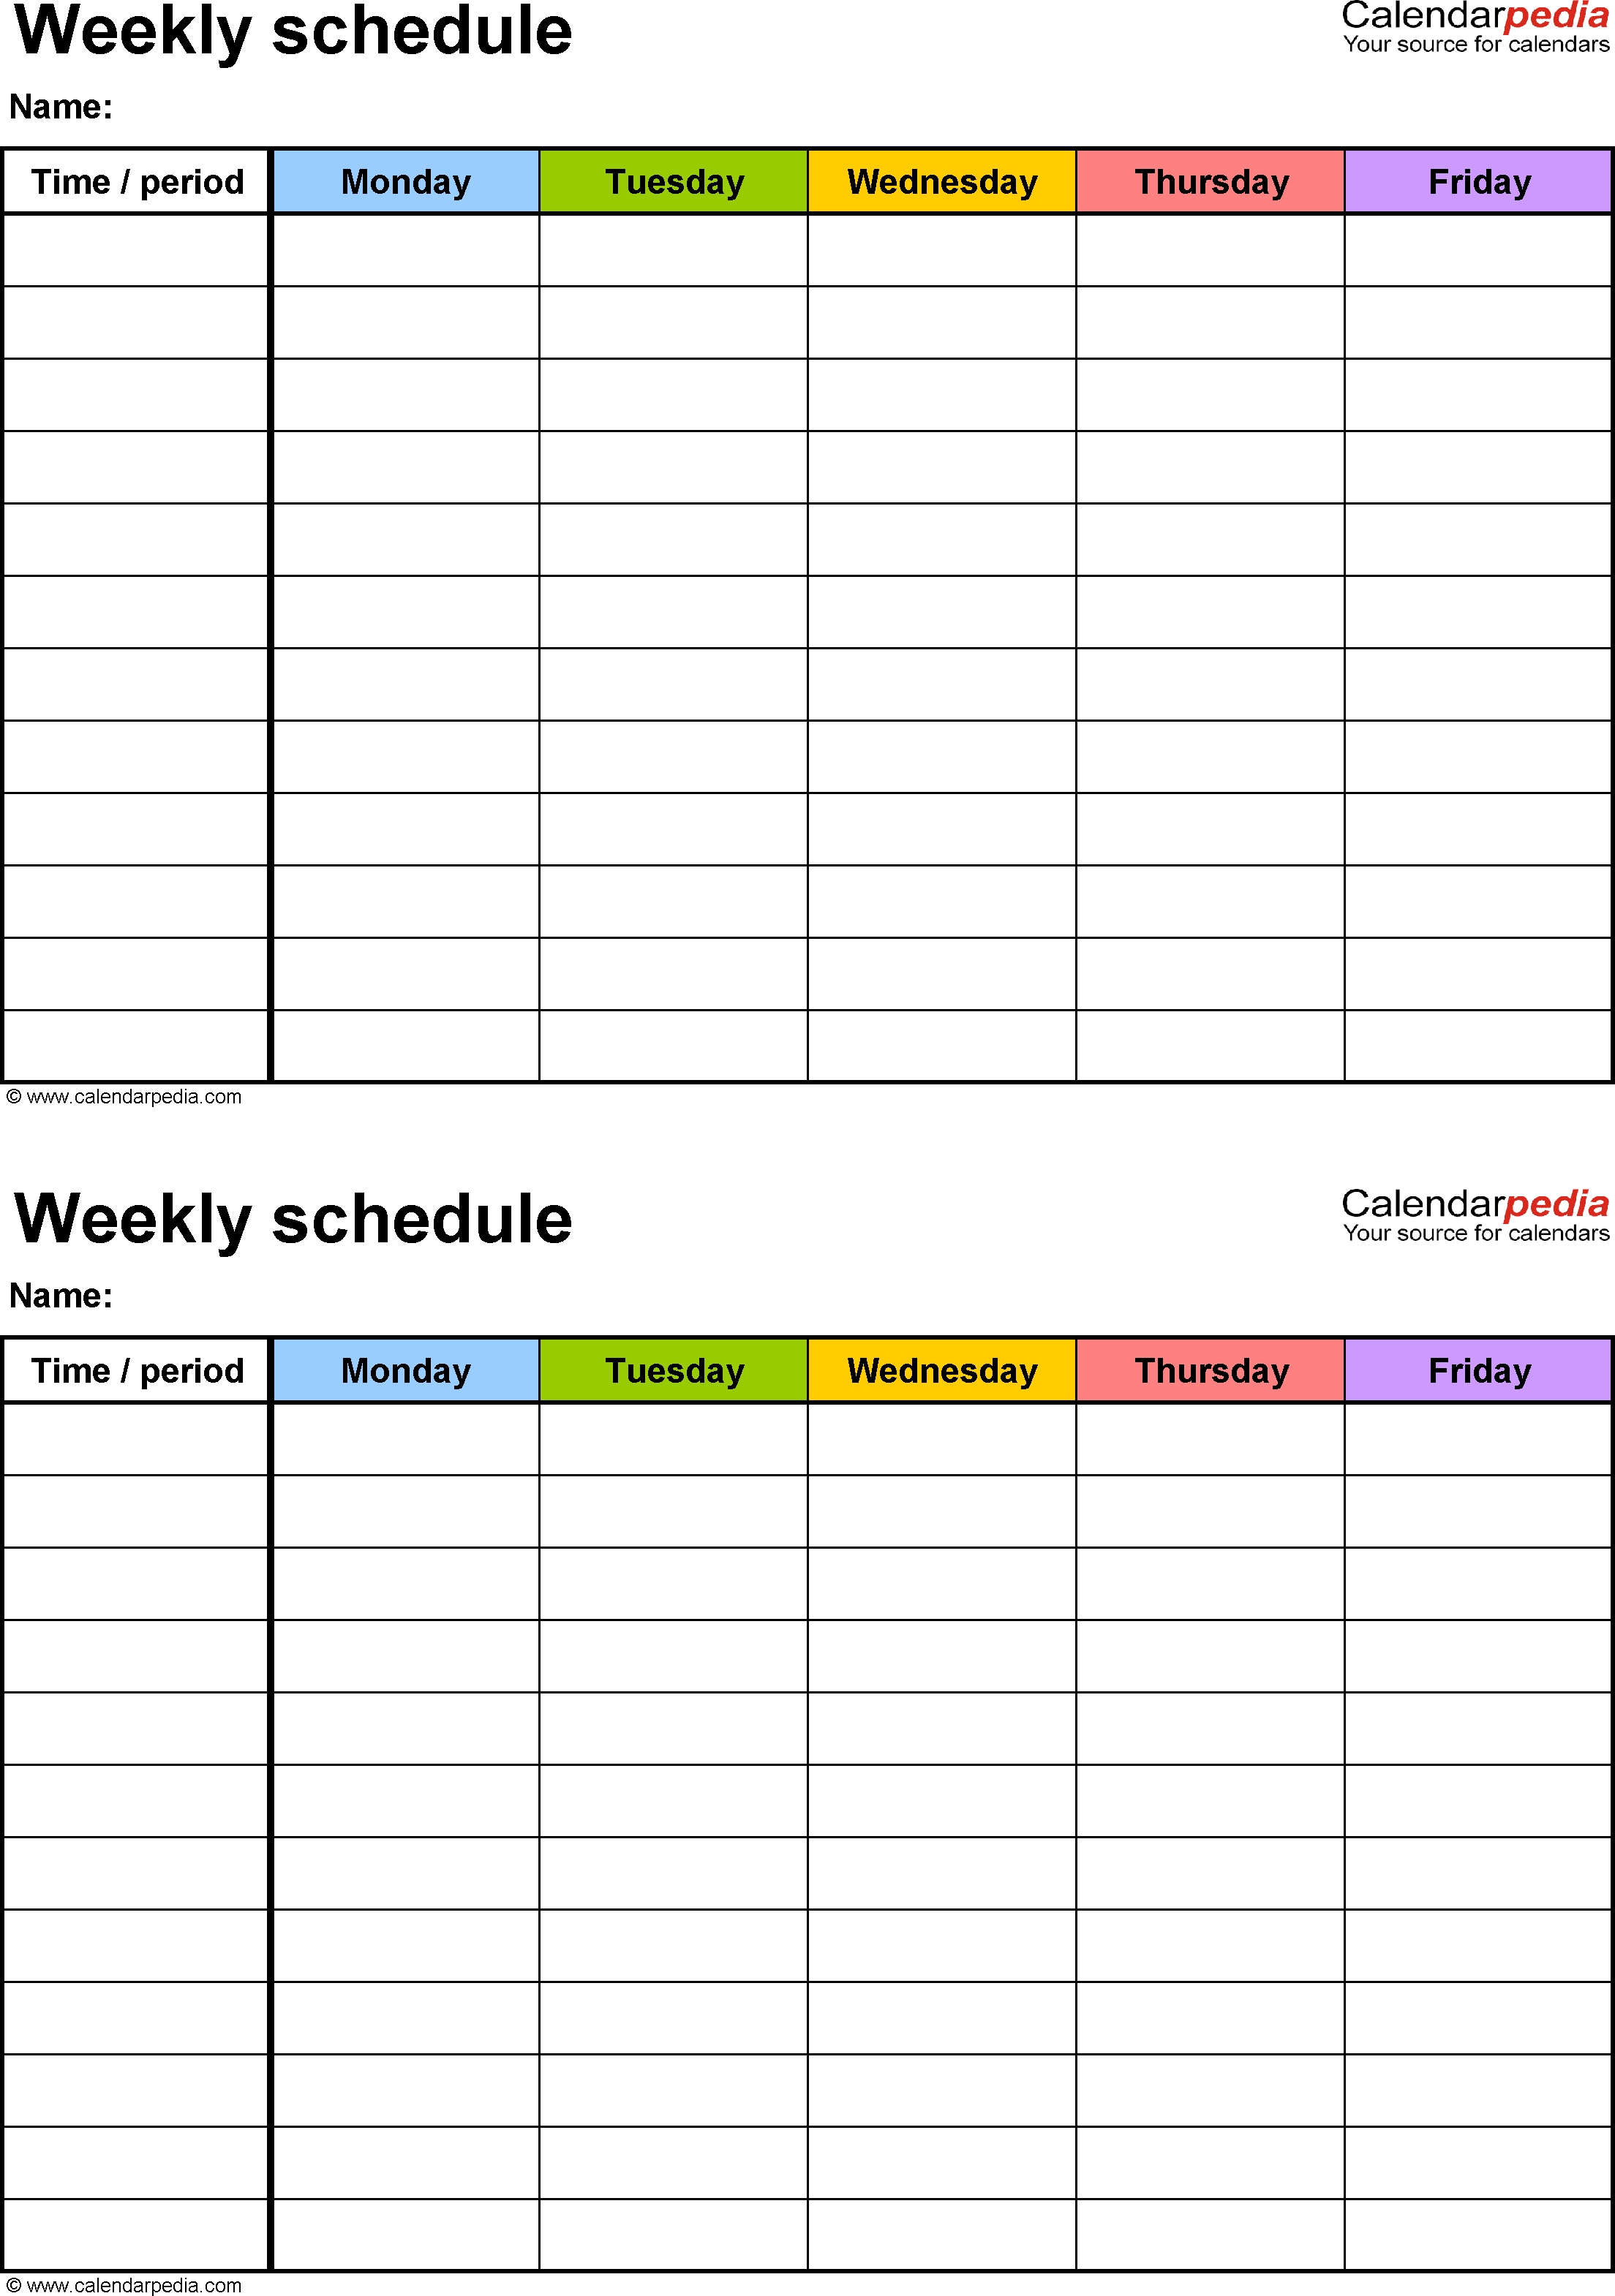 Free Weekly Schedule Templates For Pdf - 18 Templates 4 Person Calendar Template